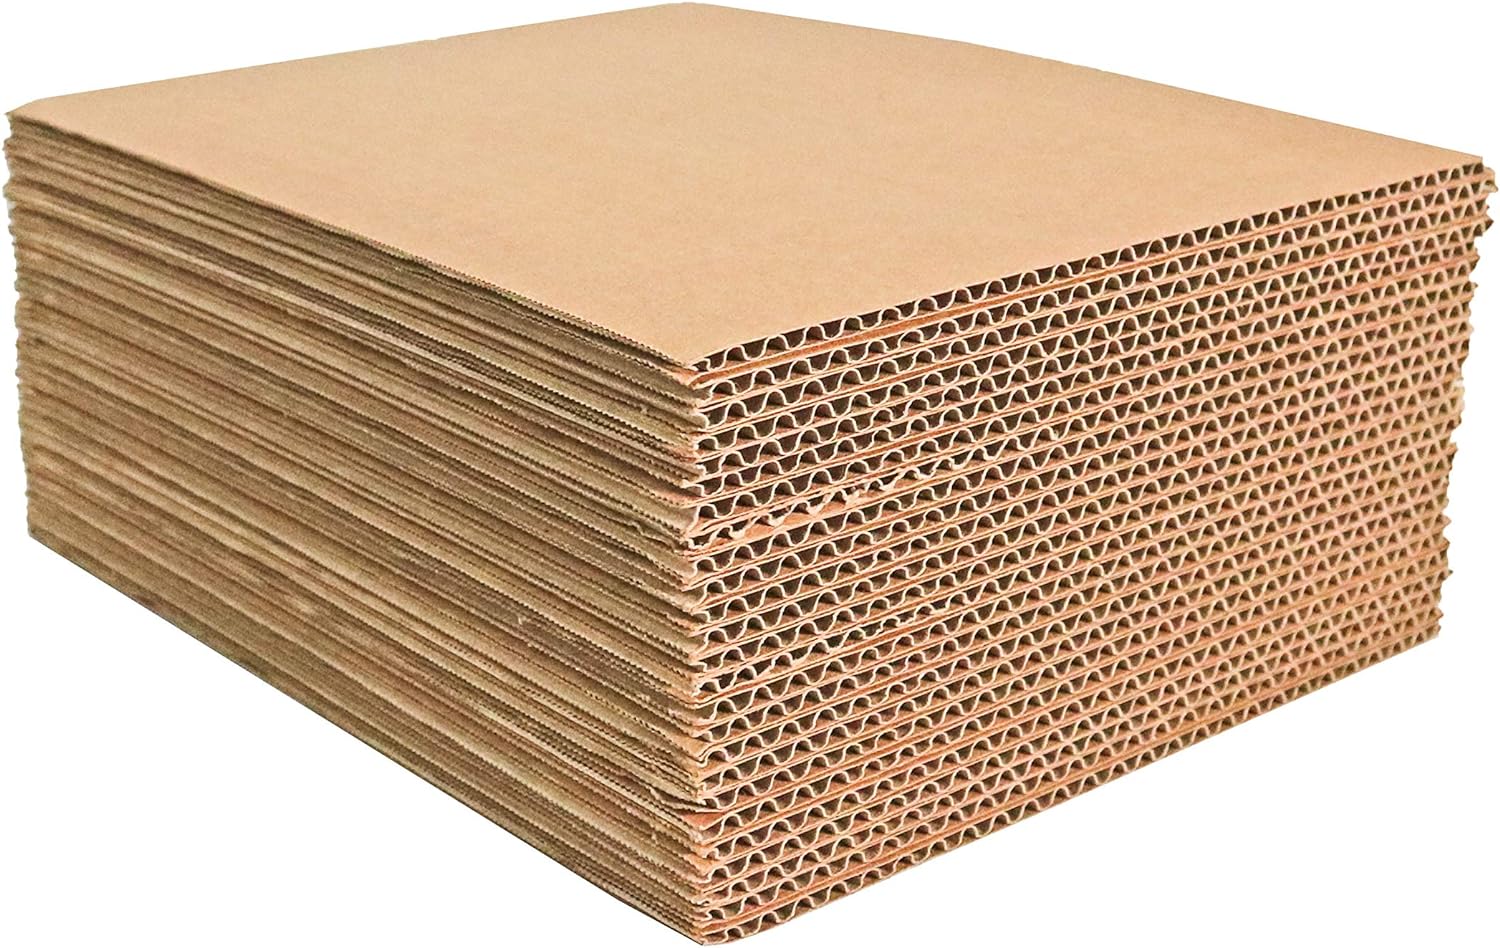 100-8.5" x 11" Corrugated Filler Pads Inserts w/ Free Shipping 